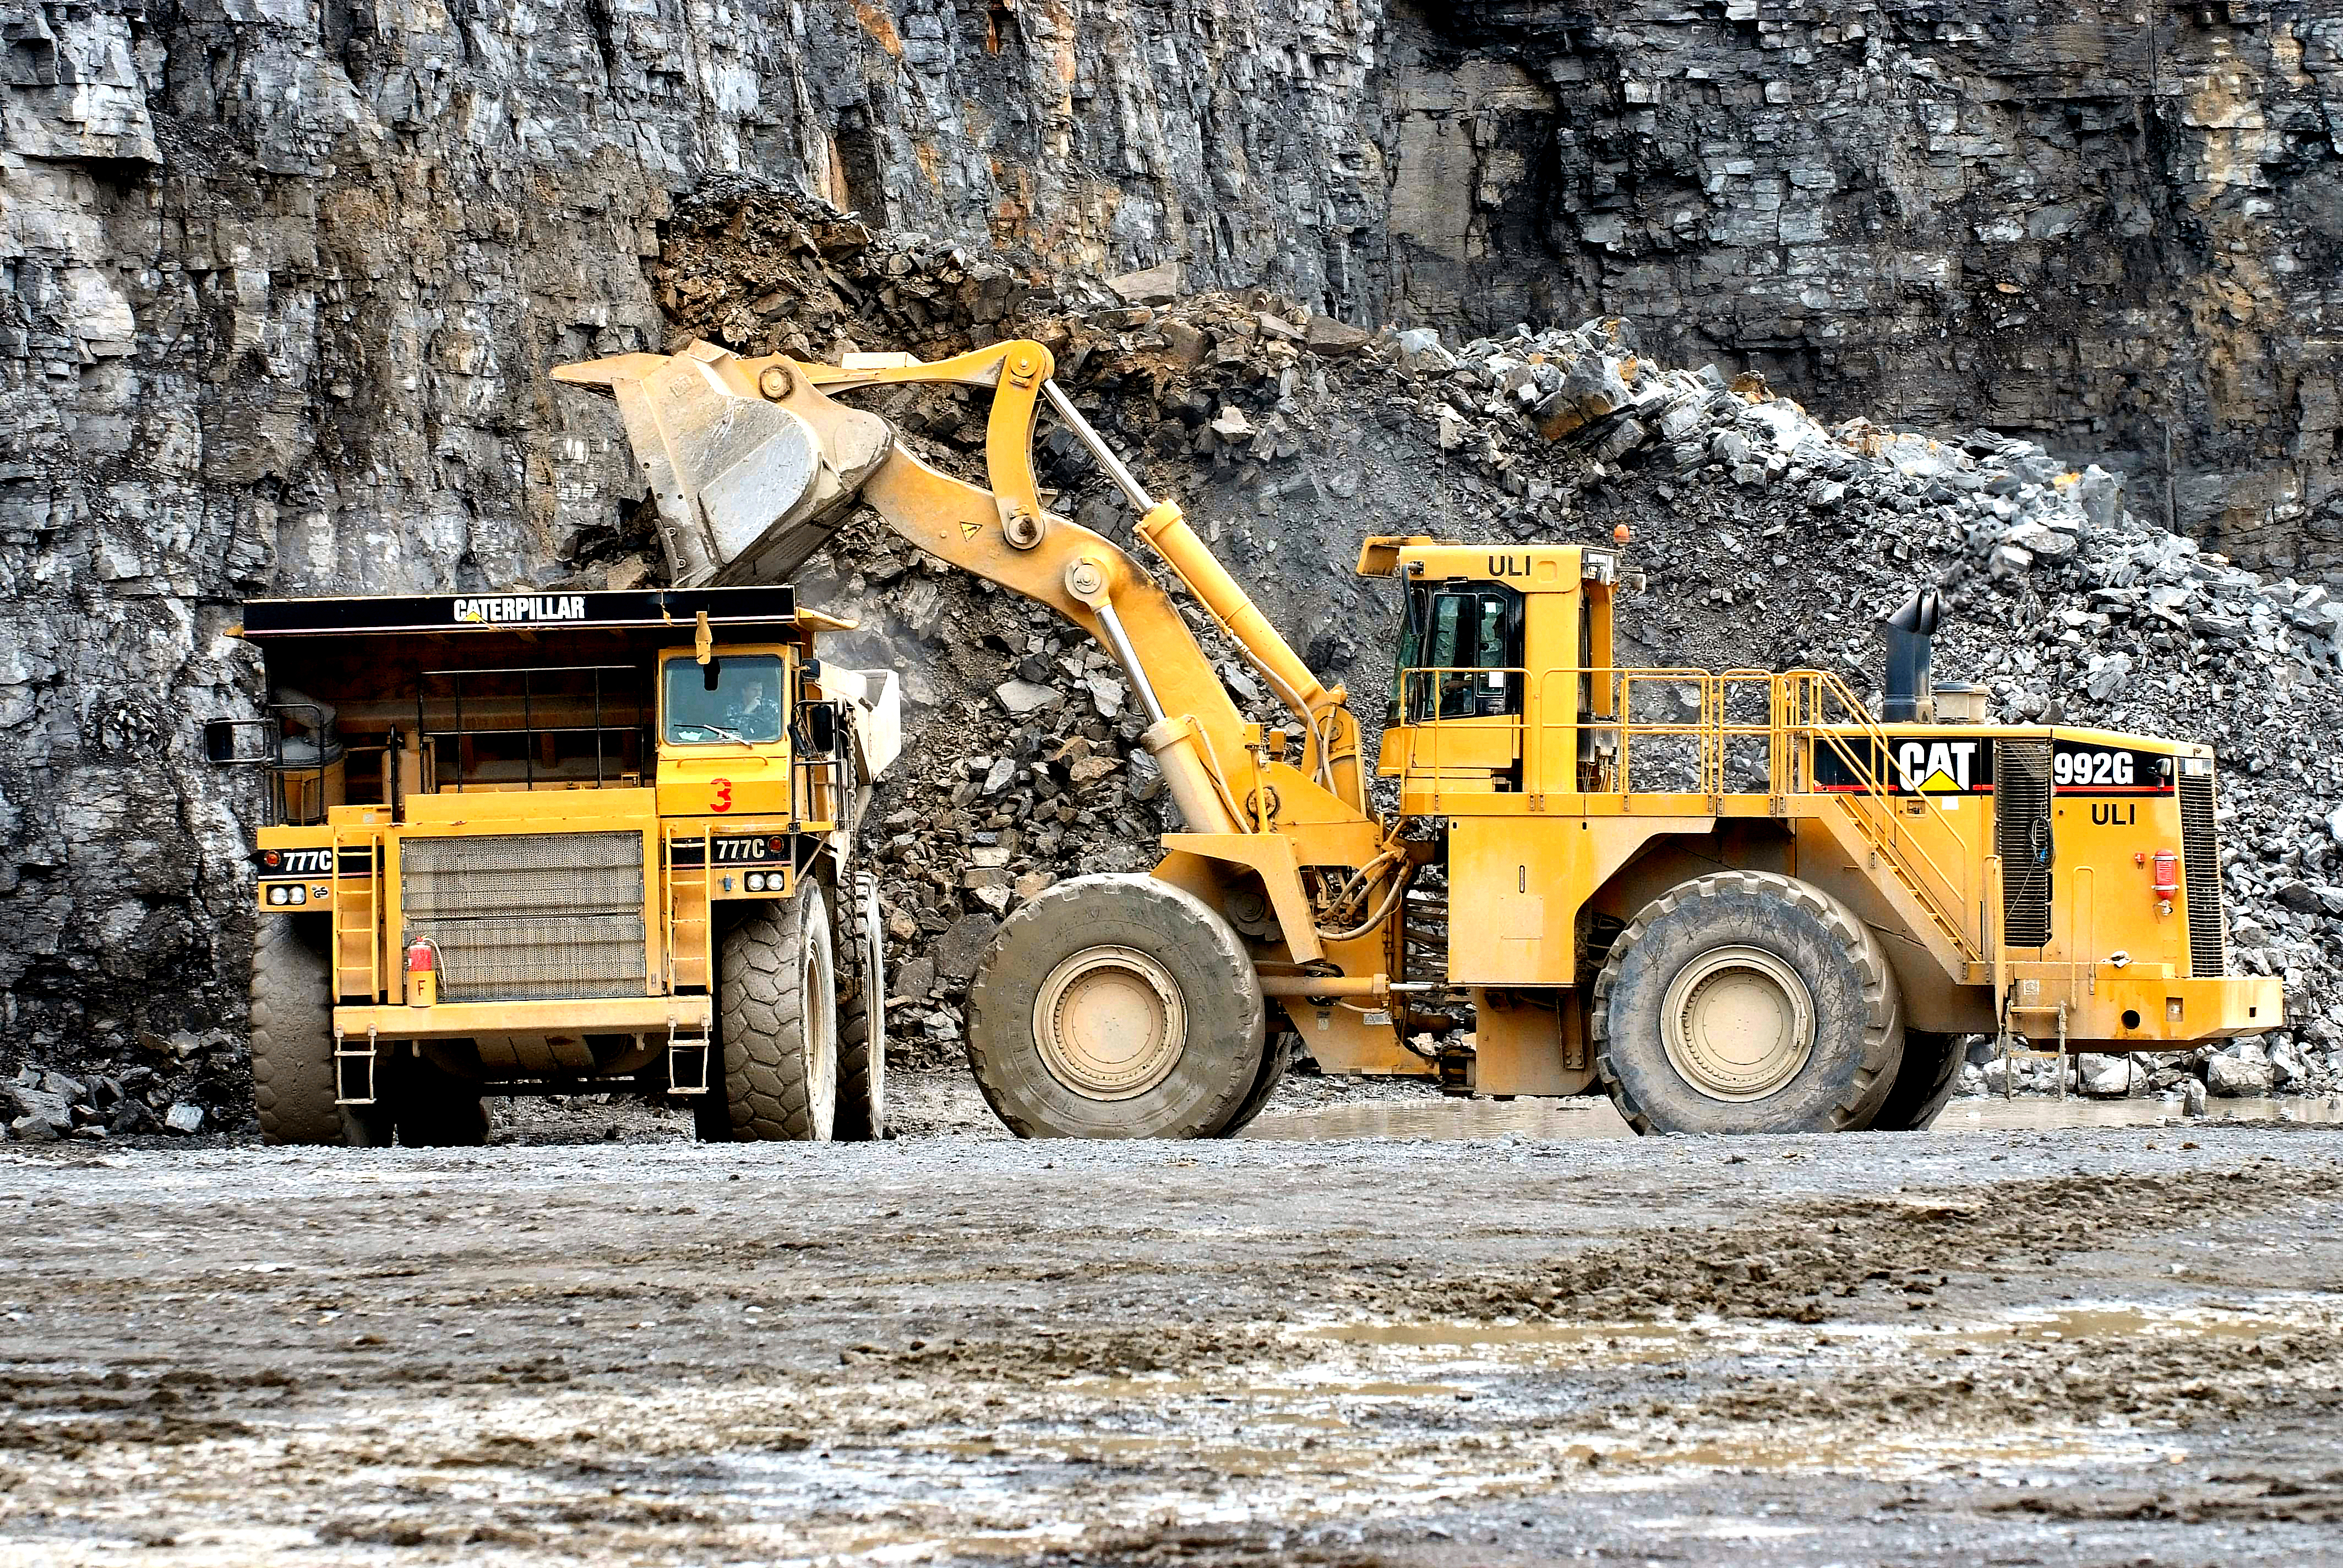 Yellow wheel loader loads dumper truck in front of a stone wall in the quarry